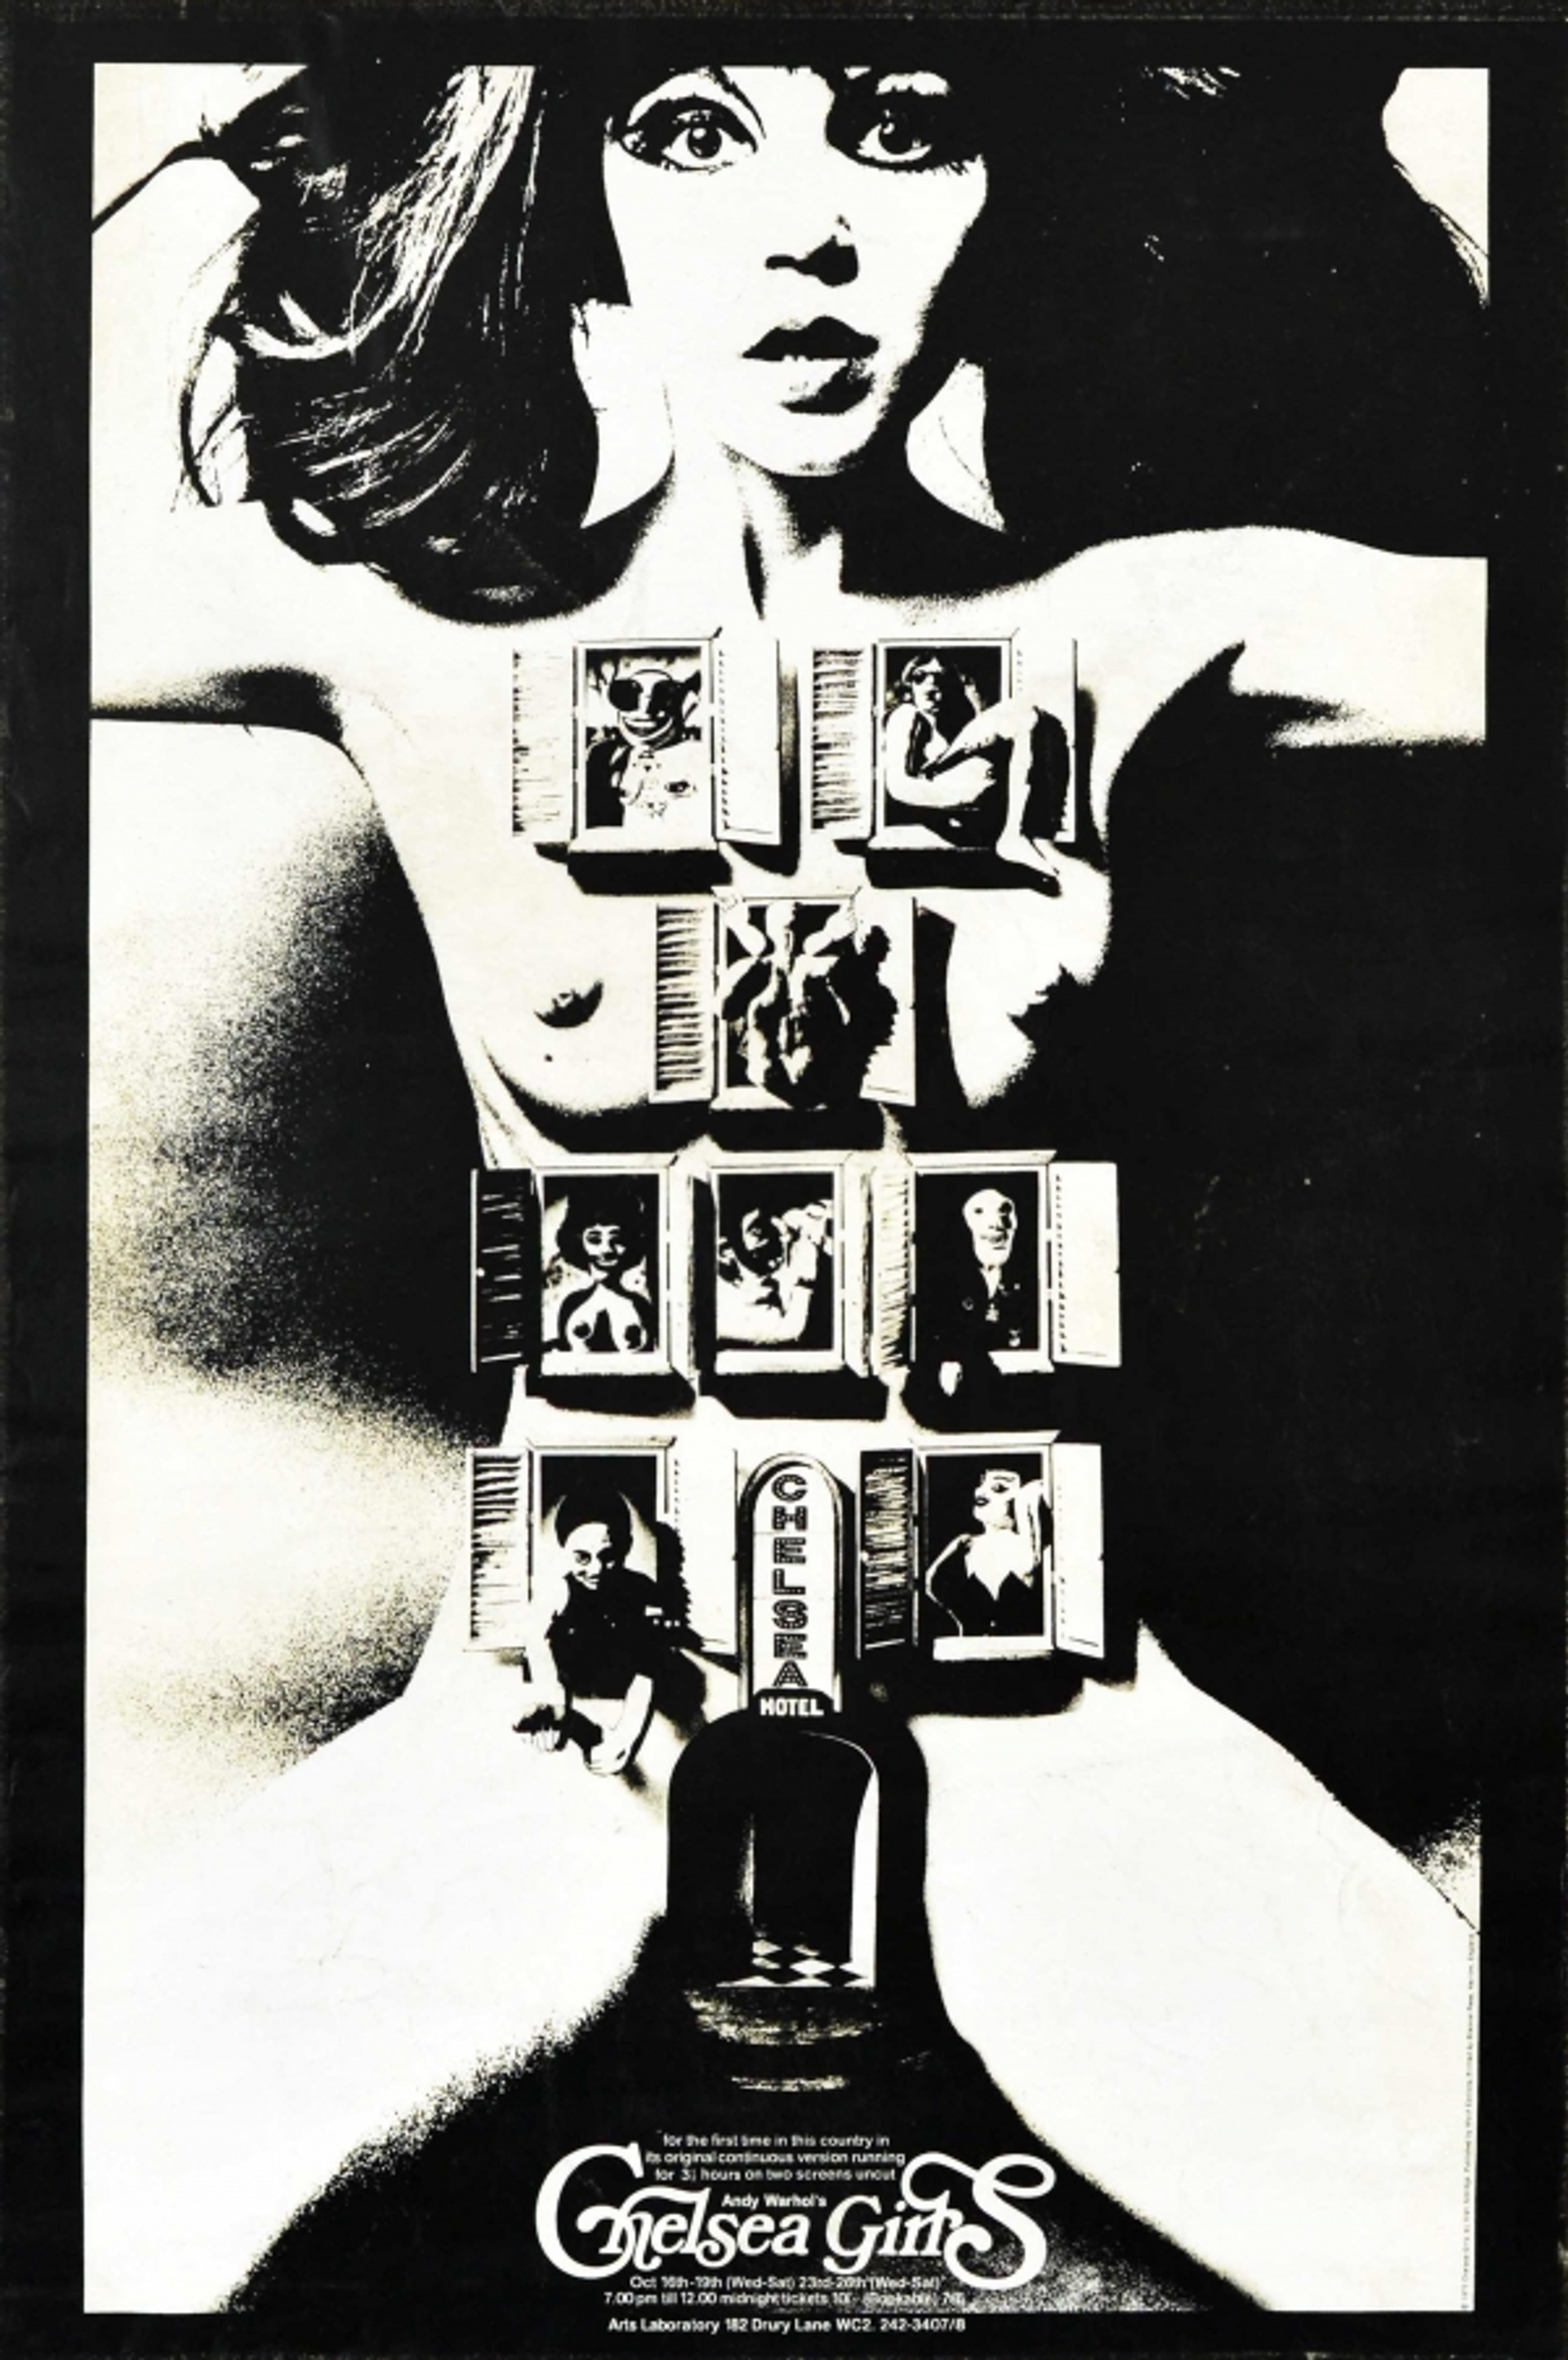 A monochrome image of a nude woman. Superimposed on her body are eight windows with open shutters, each of which has their own individual subject living within. The name "Chelsea Girls" is written underneath.